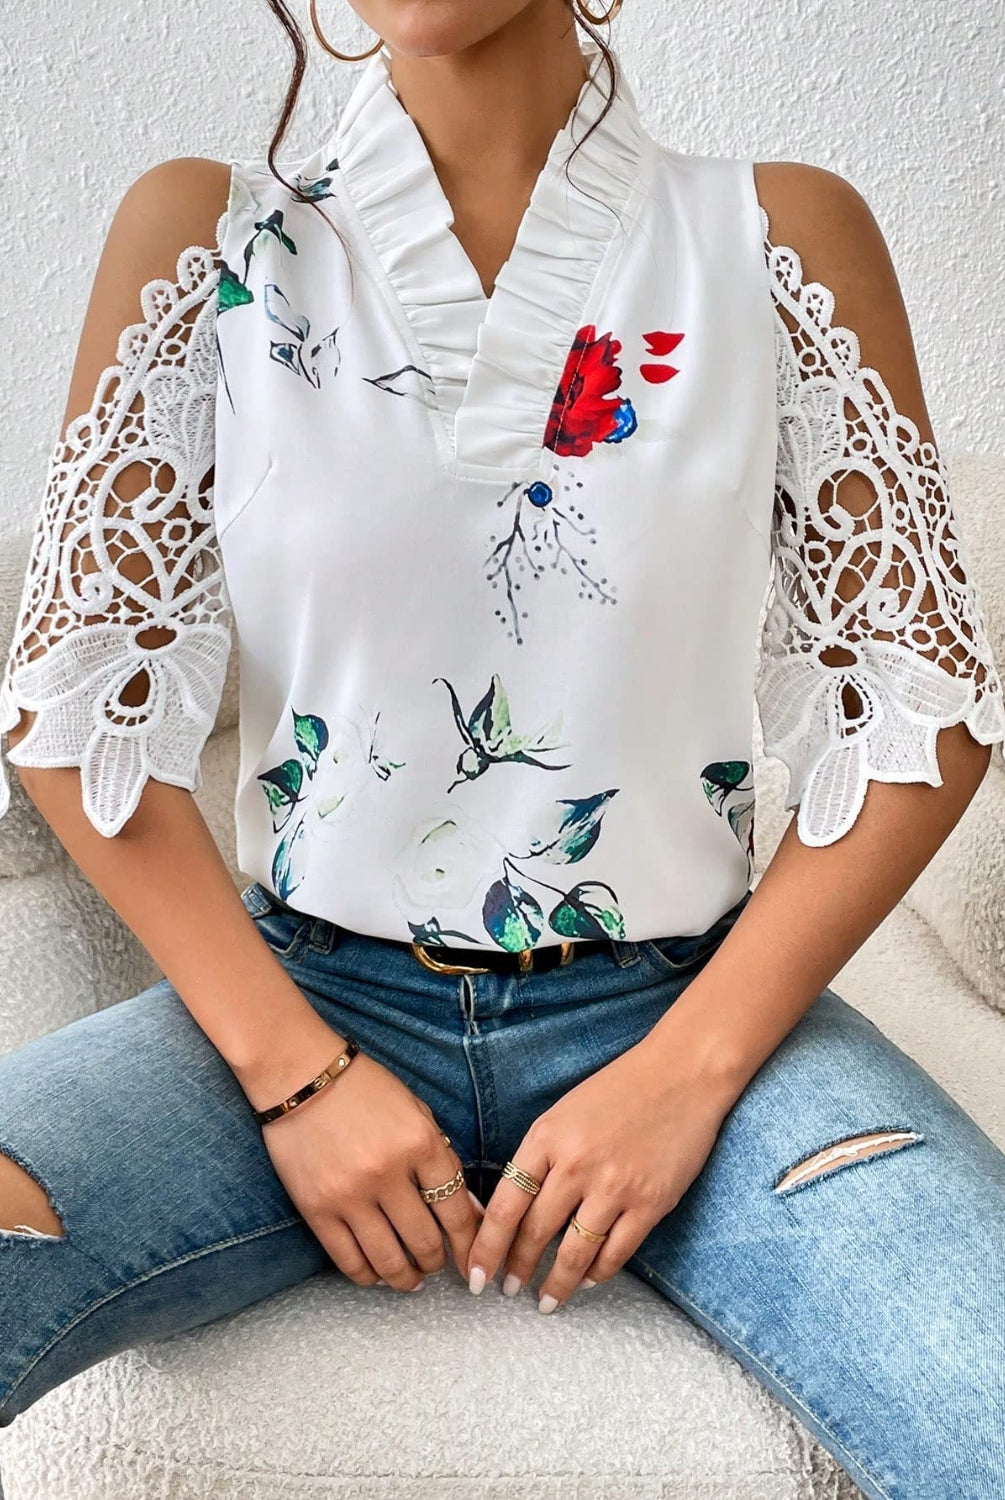 Whimsical White Lace Blouse with Floral Accents | GemThreads Boutique - GemThreads Boutique Whimsical White Lace Blouse with Floral Accents | GemThreads Boutique